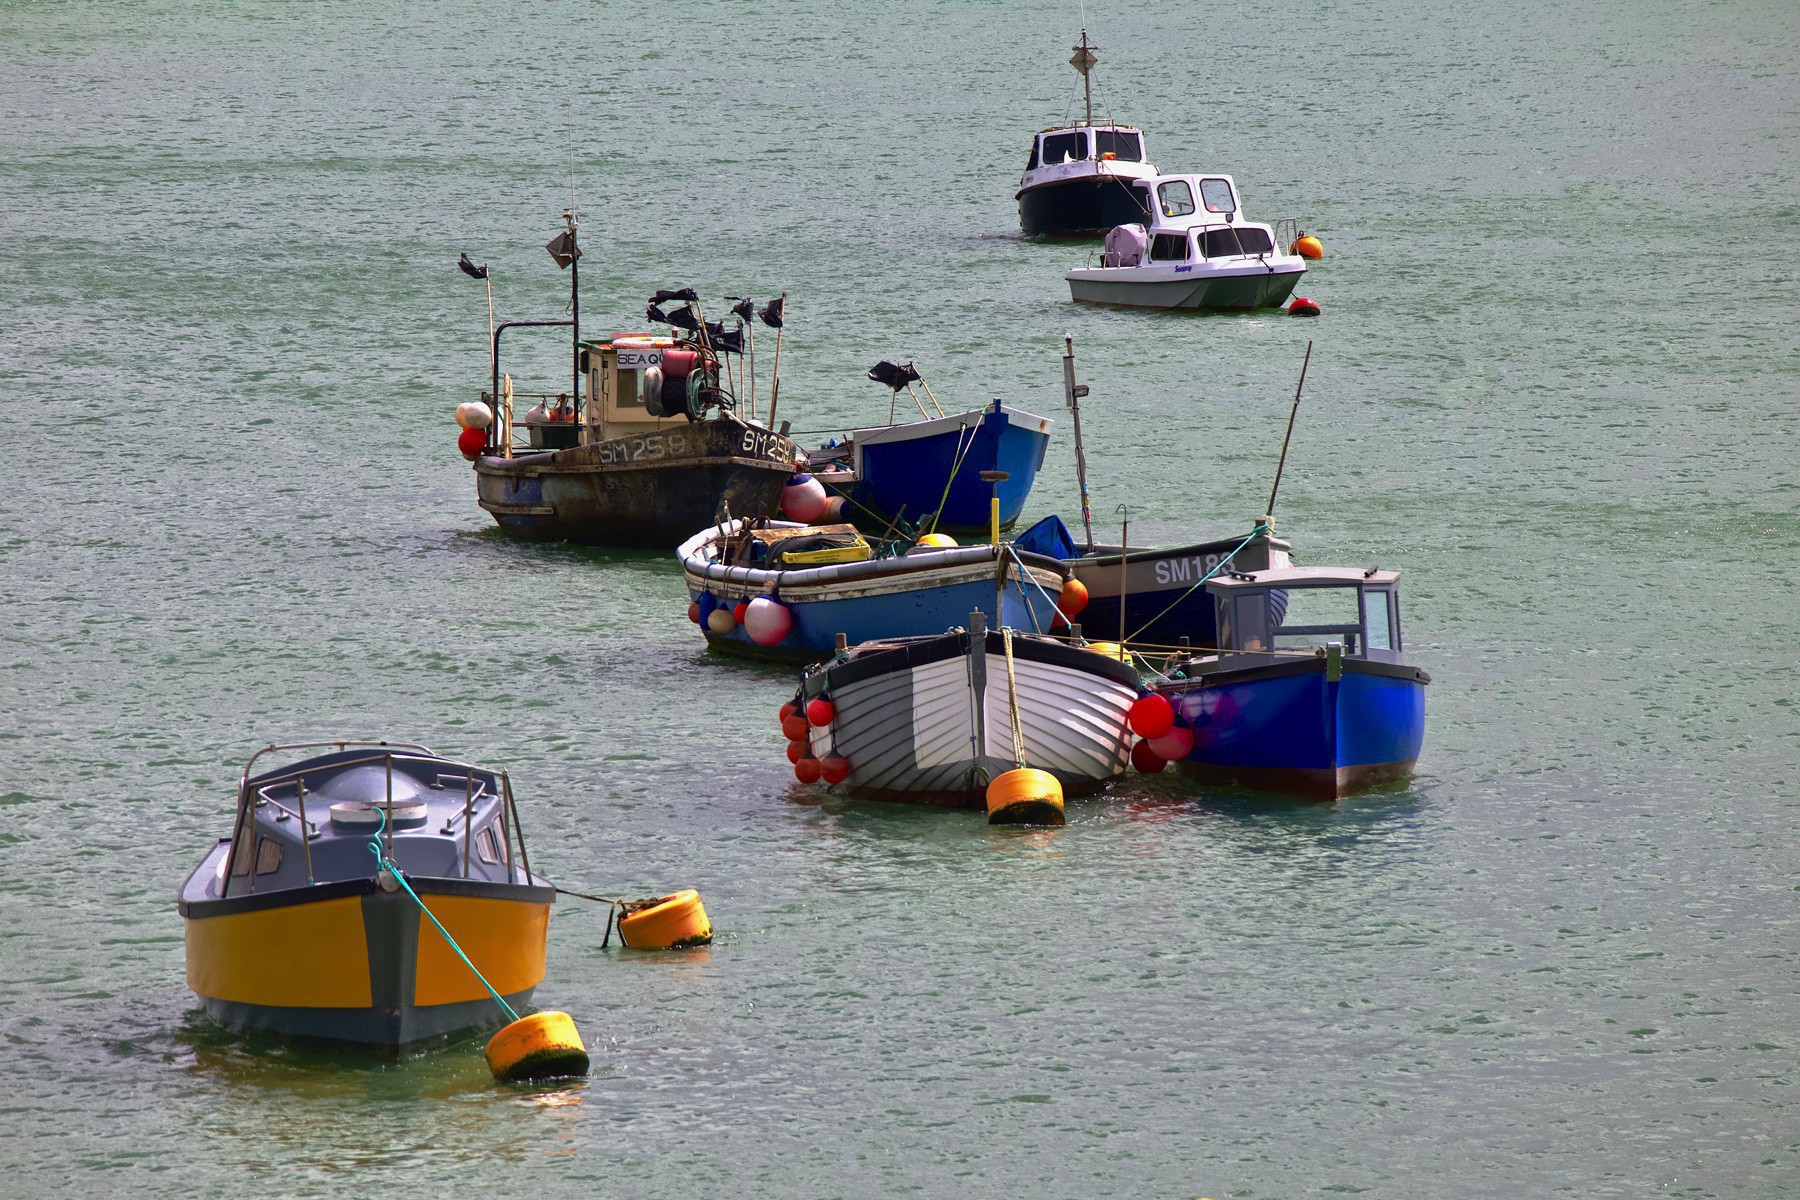 Boats moored in the River Adur between Shoreham-by-Sea and Shoreham Beach